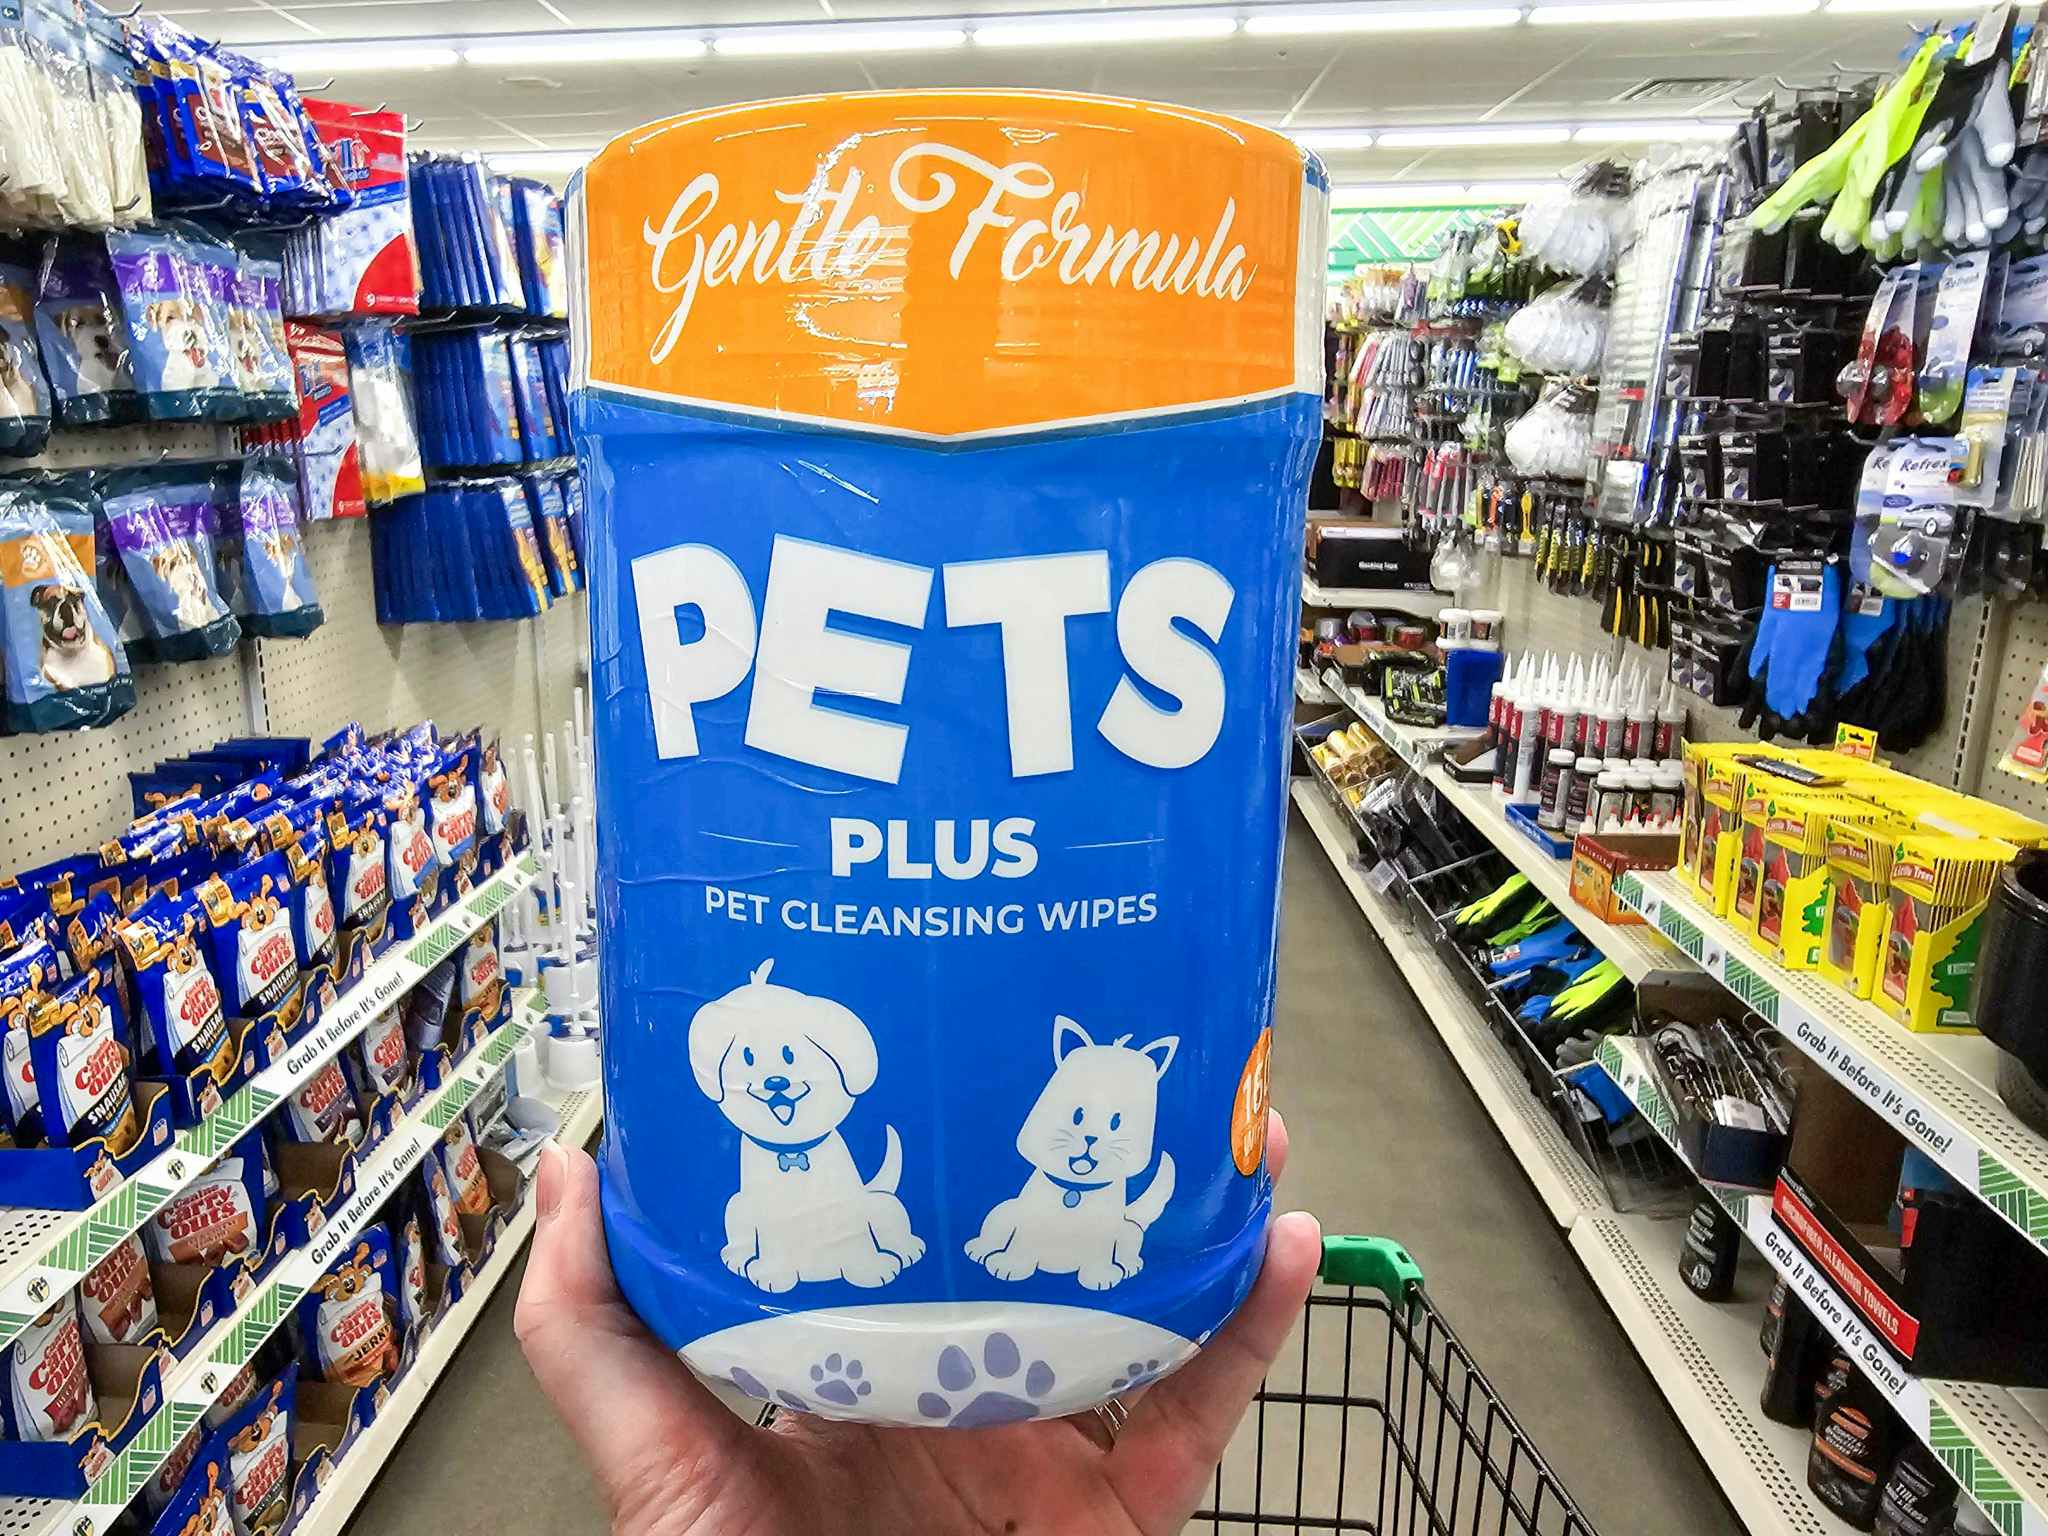 person holding a package of pet cleansing wipes